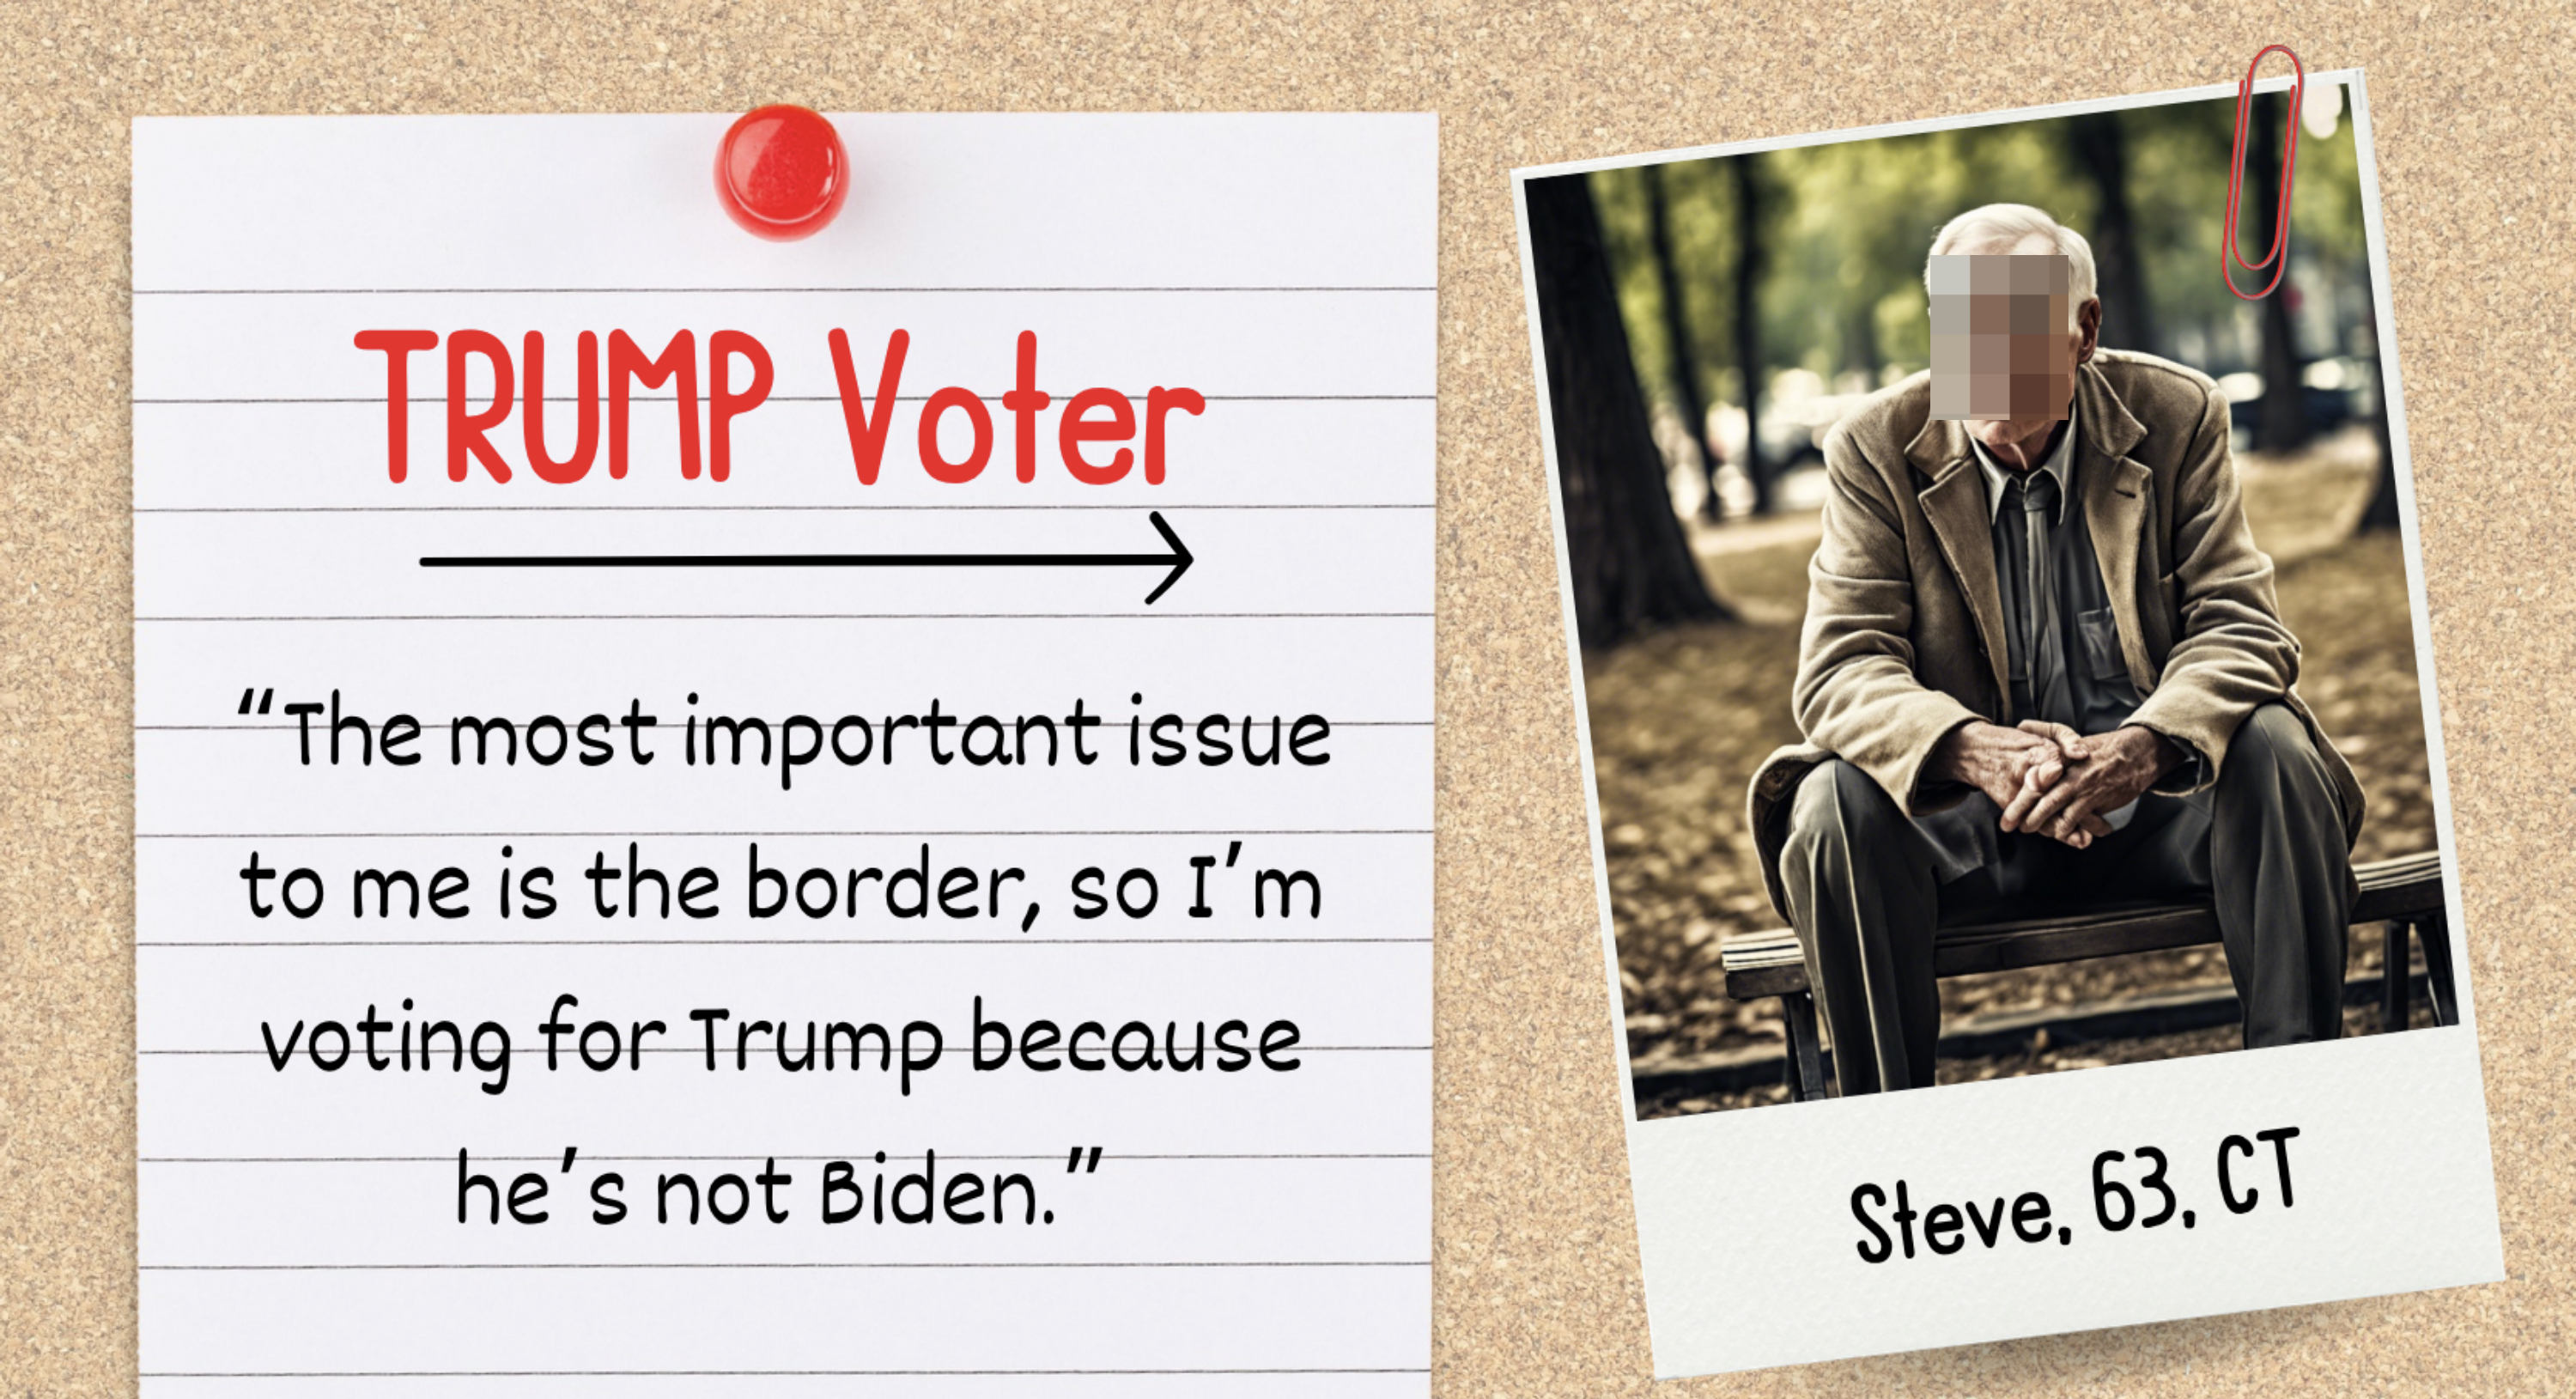 Summary of voter&#x27;s statement on preferring Trump over Biden due to border concerns, with a photo of Steve, 63, from CT